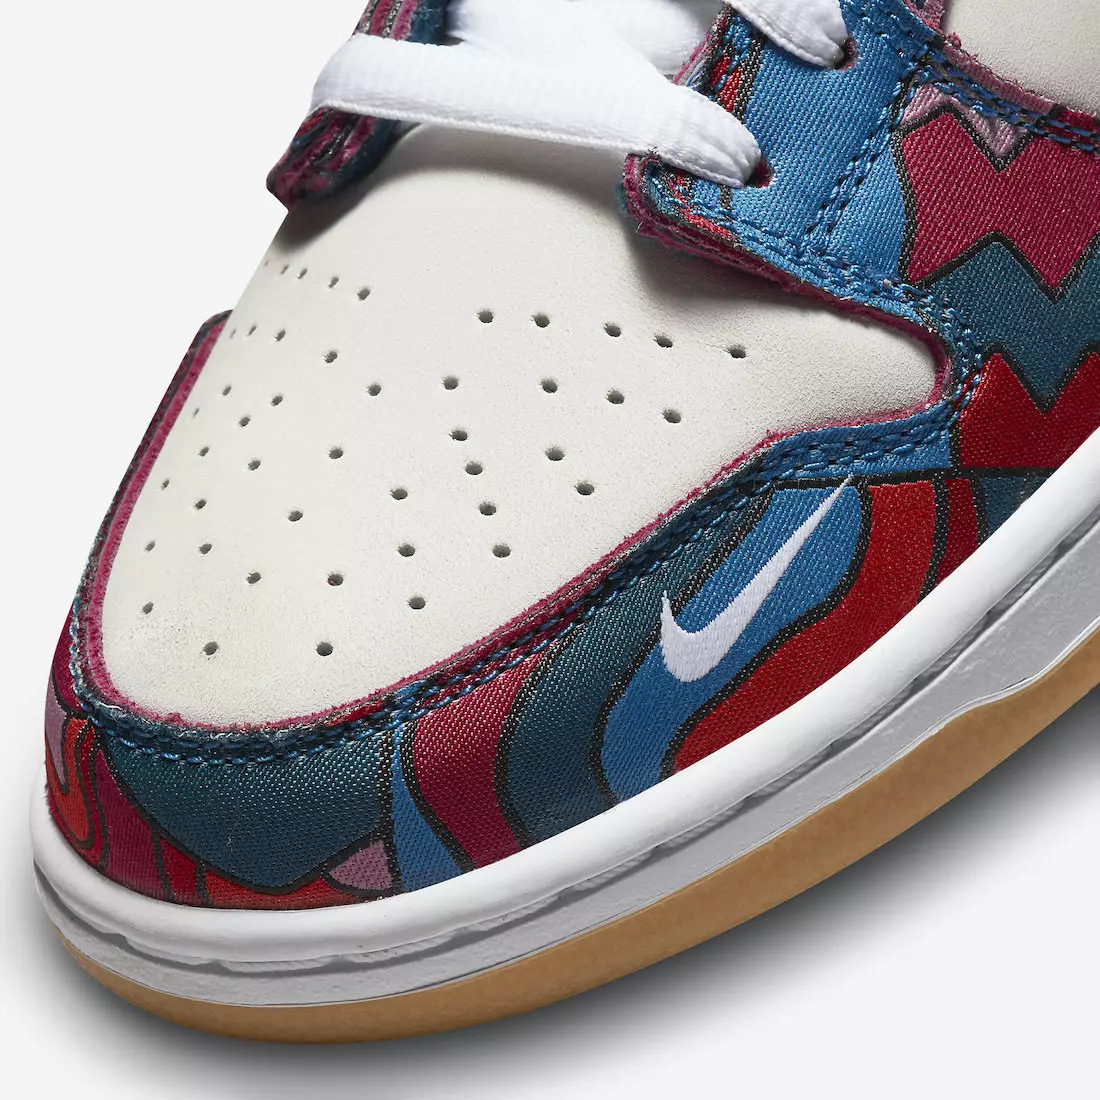 Parra Nike SB Dunk Low DH7695-600 출시일 가격